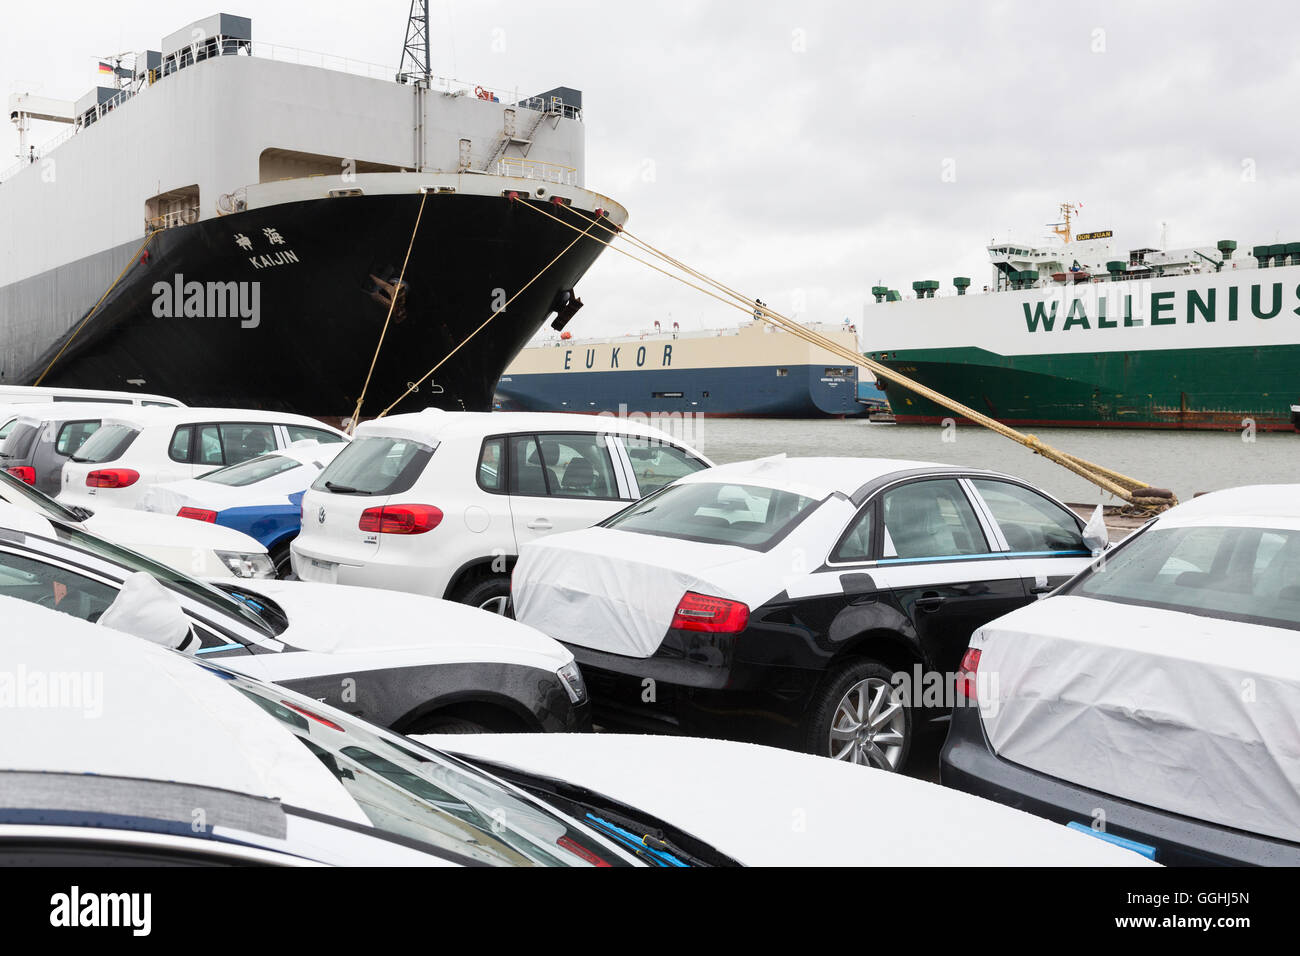 New cars on a parking area awaiting shipping, Bremerhaven, Bremen, Germany Stock Photo